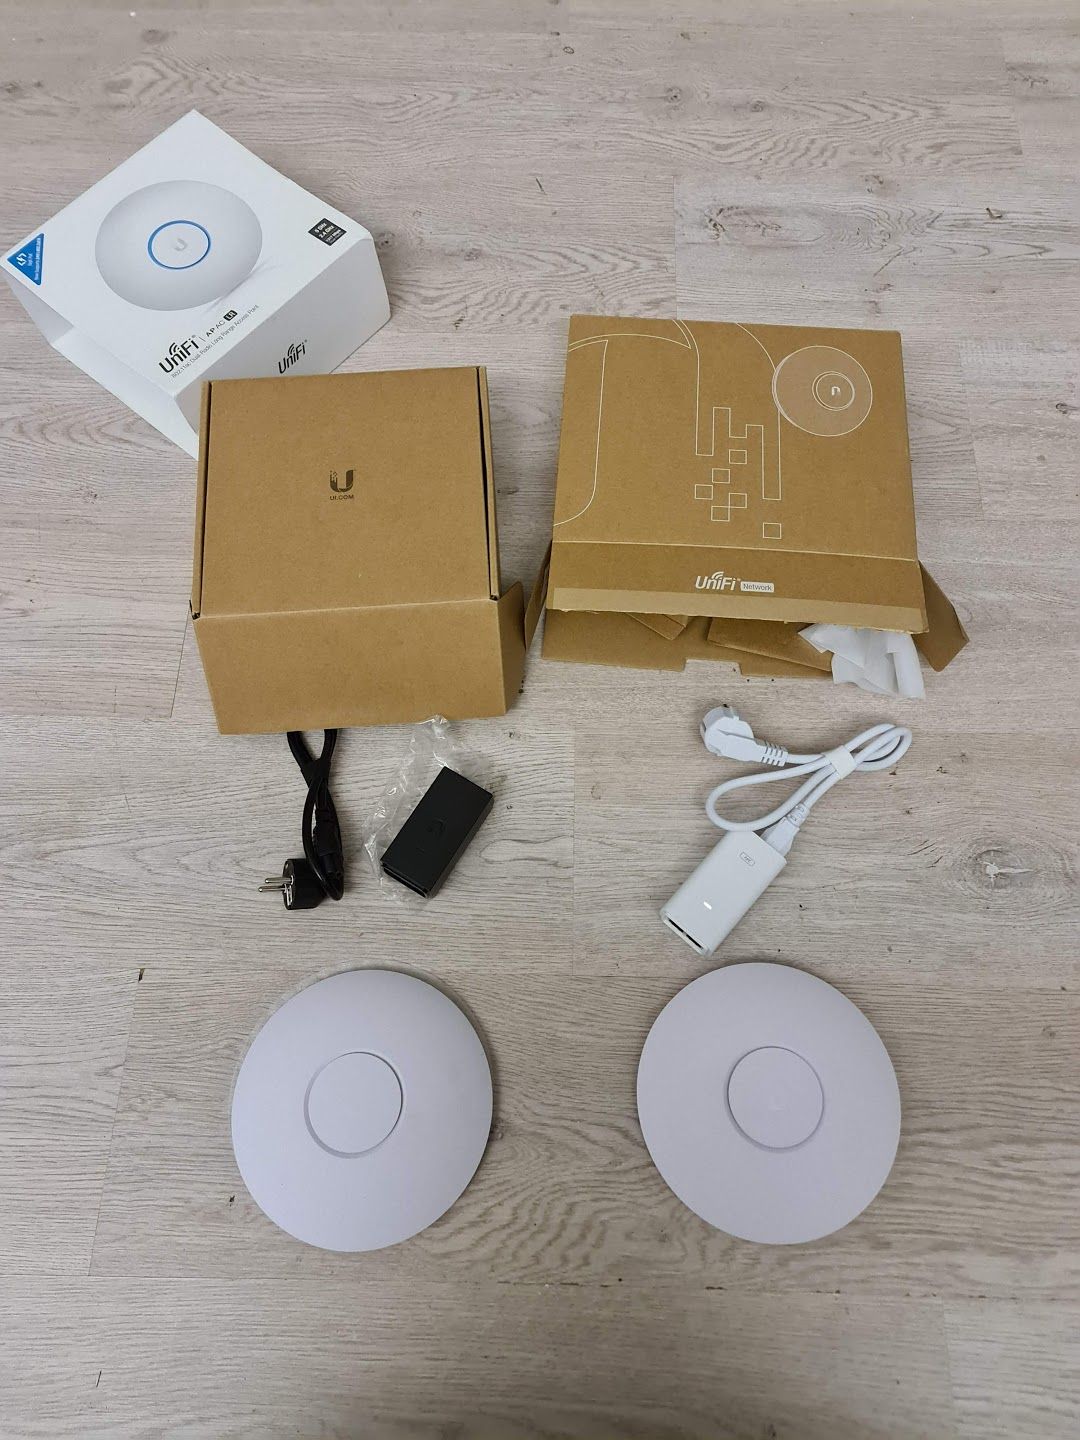 Old and New version of UAP-AC-LR Ubiquiti Community